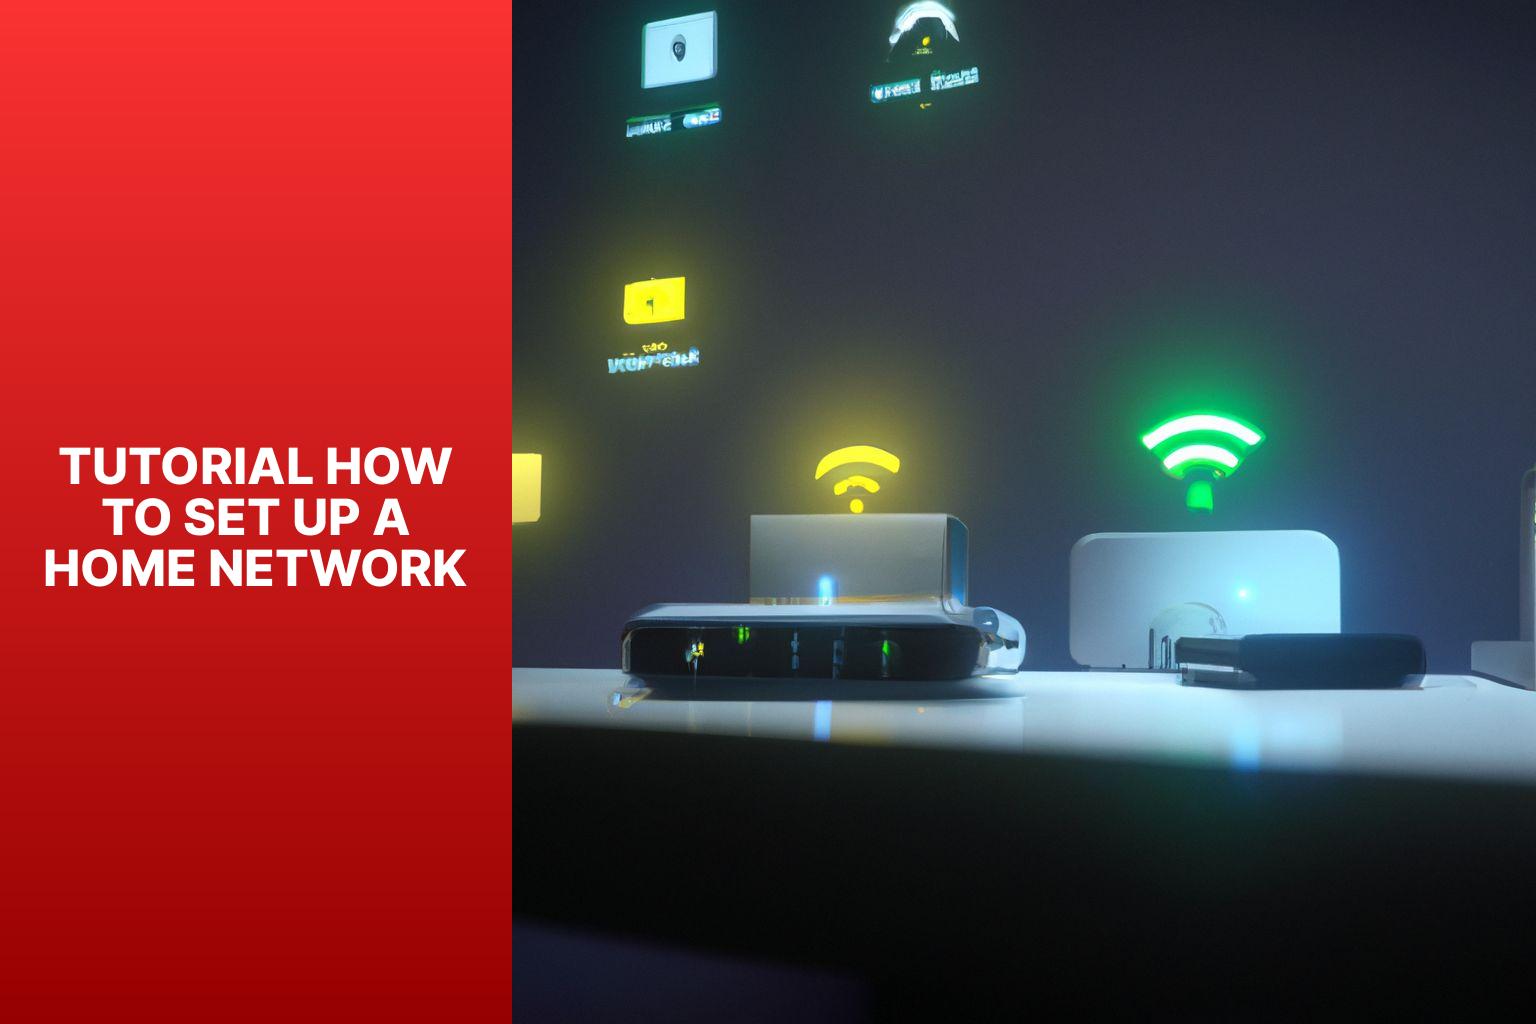 Tutorial How to Set up a Home Network